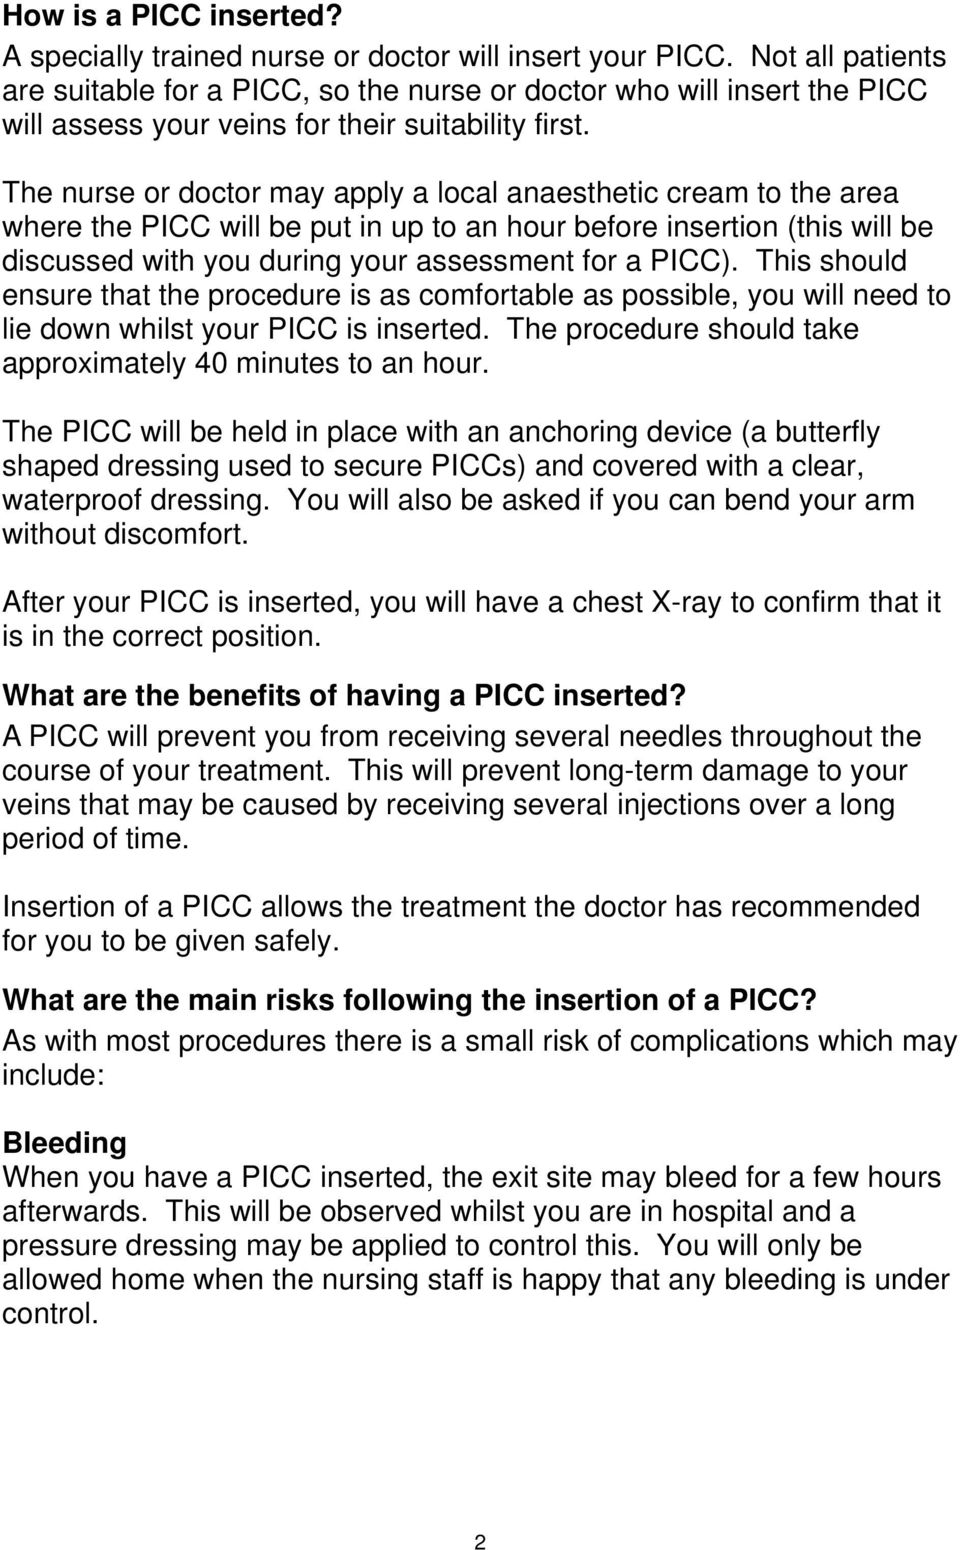 The nurse or doctor may apply a local anaesthetic cream to the area where the PICC will be put in up to an hour before insertion (this will be discussed with you during your assessment for a PICC).